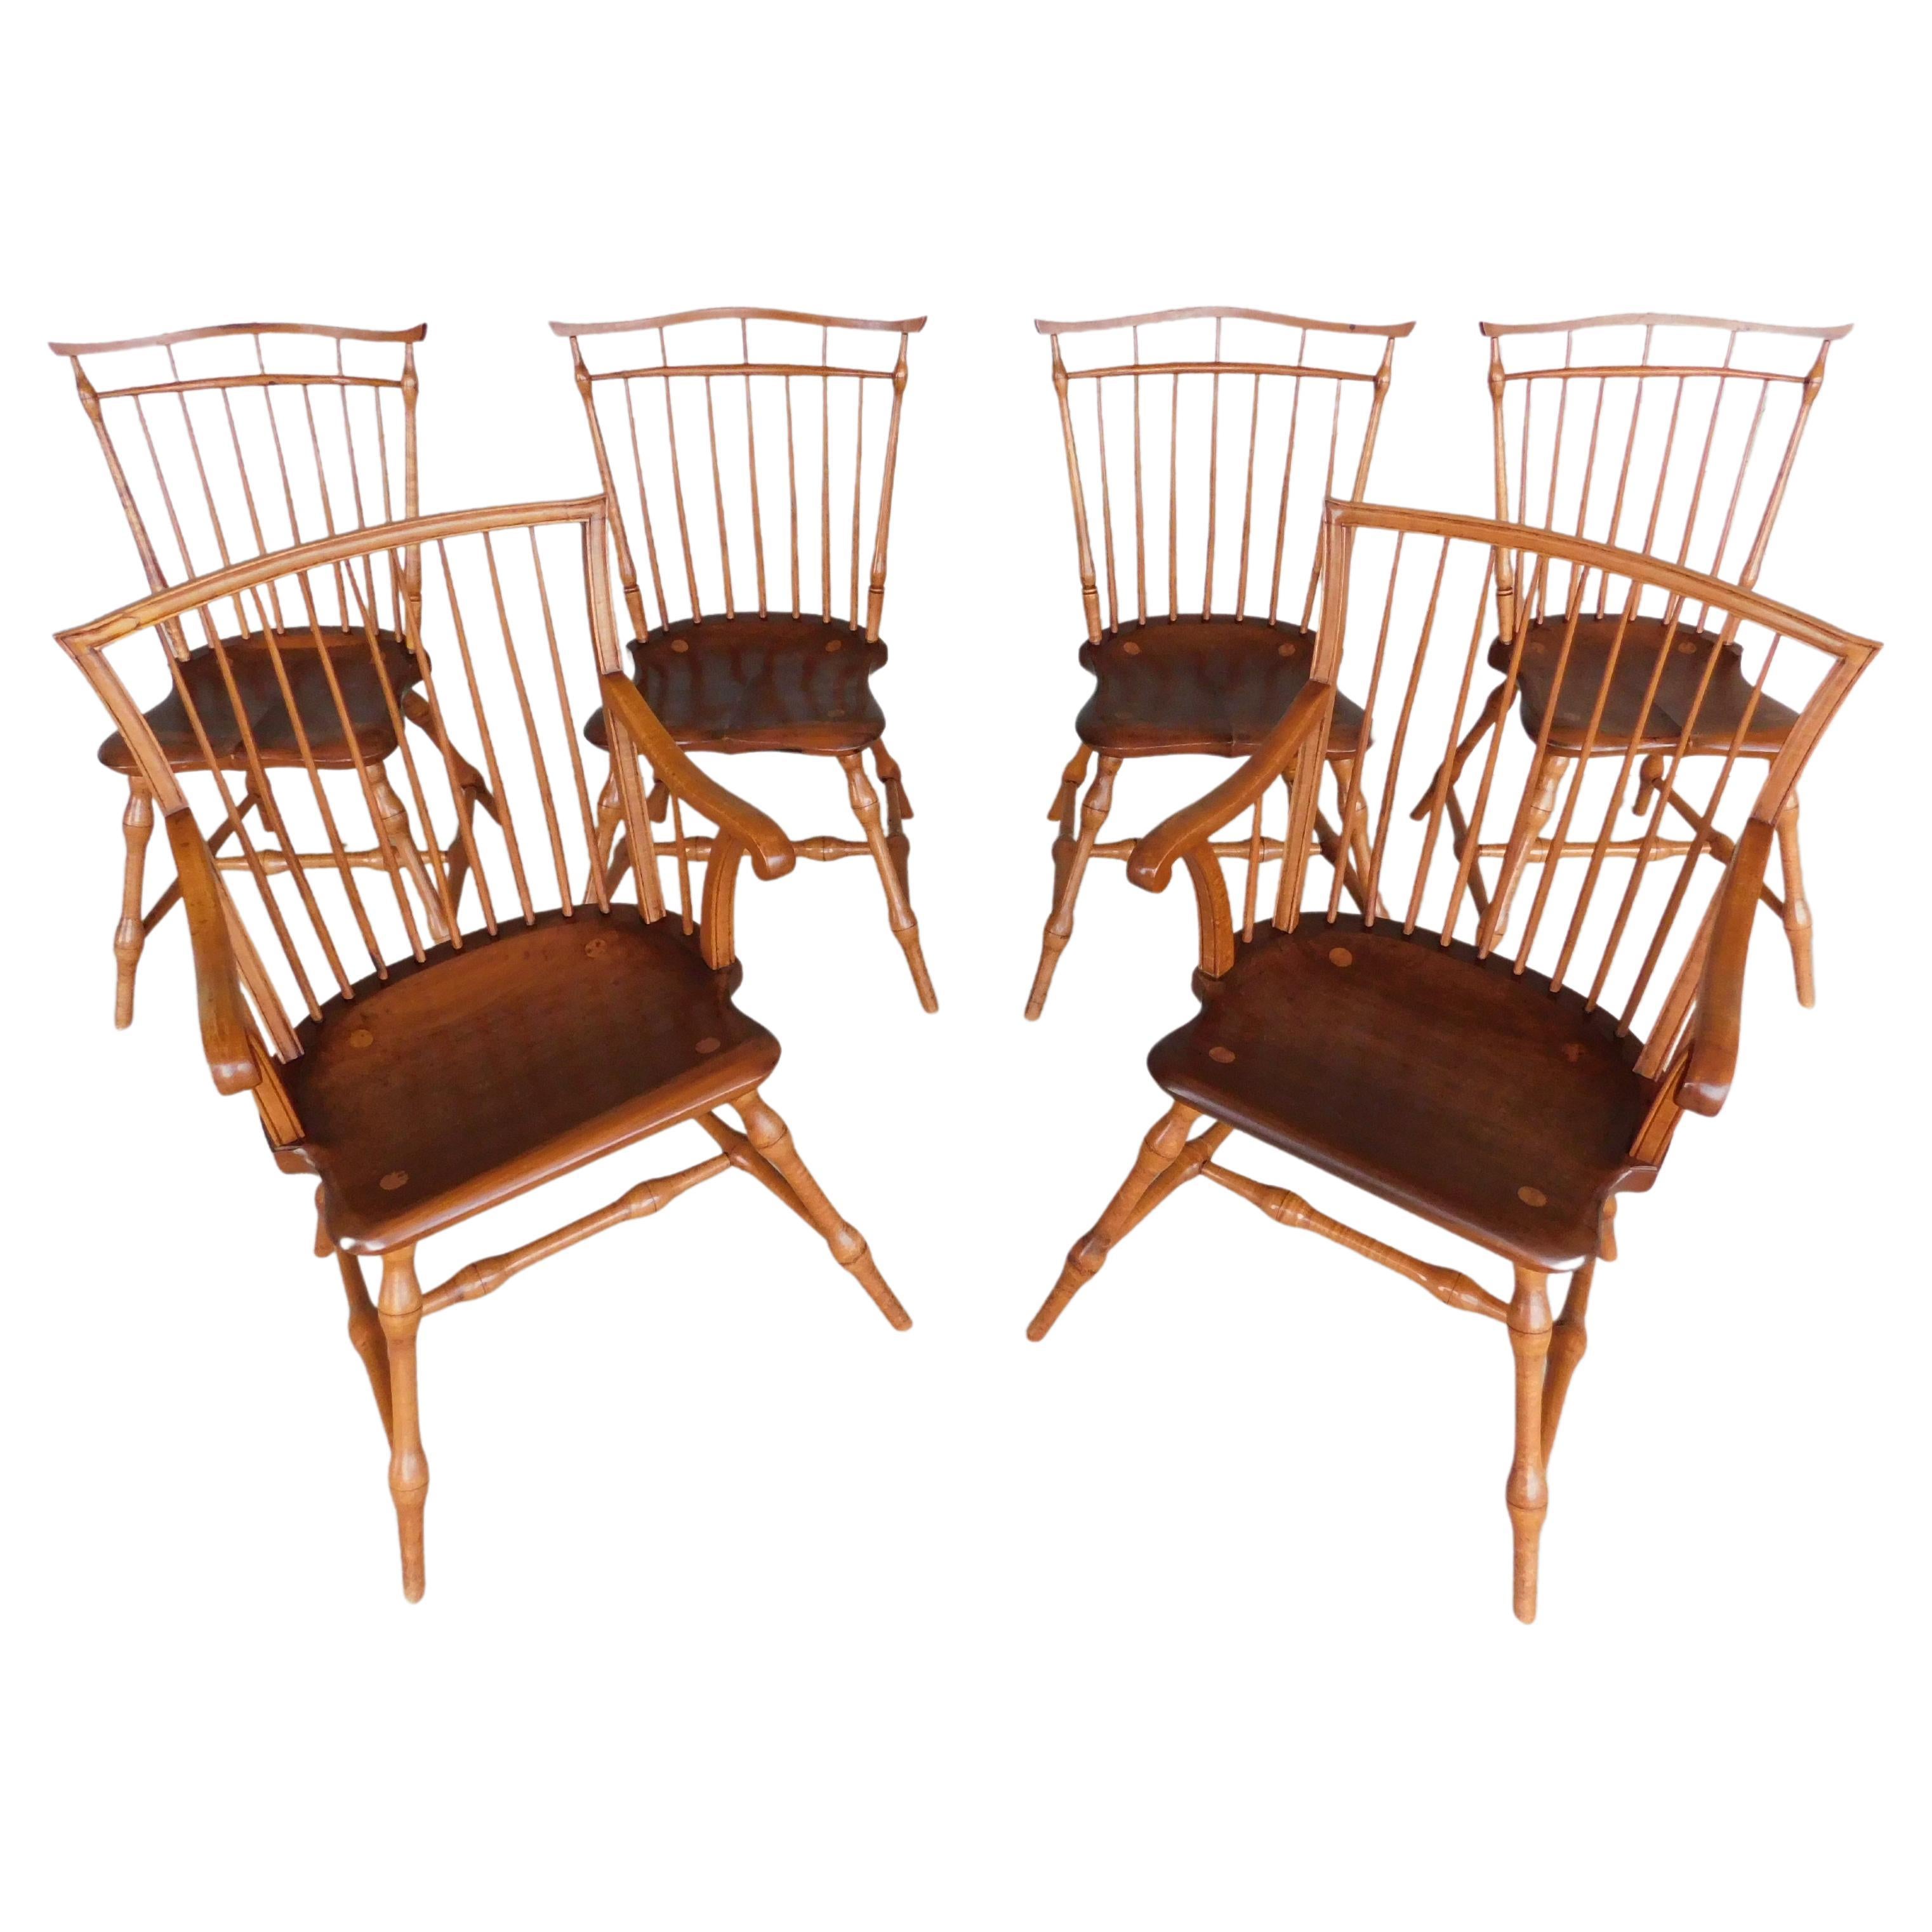 Vintage Bird Cage Windsor Chairs, Set of 6 by Marlow of York Pa For Sale